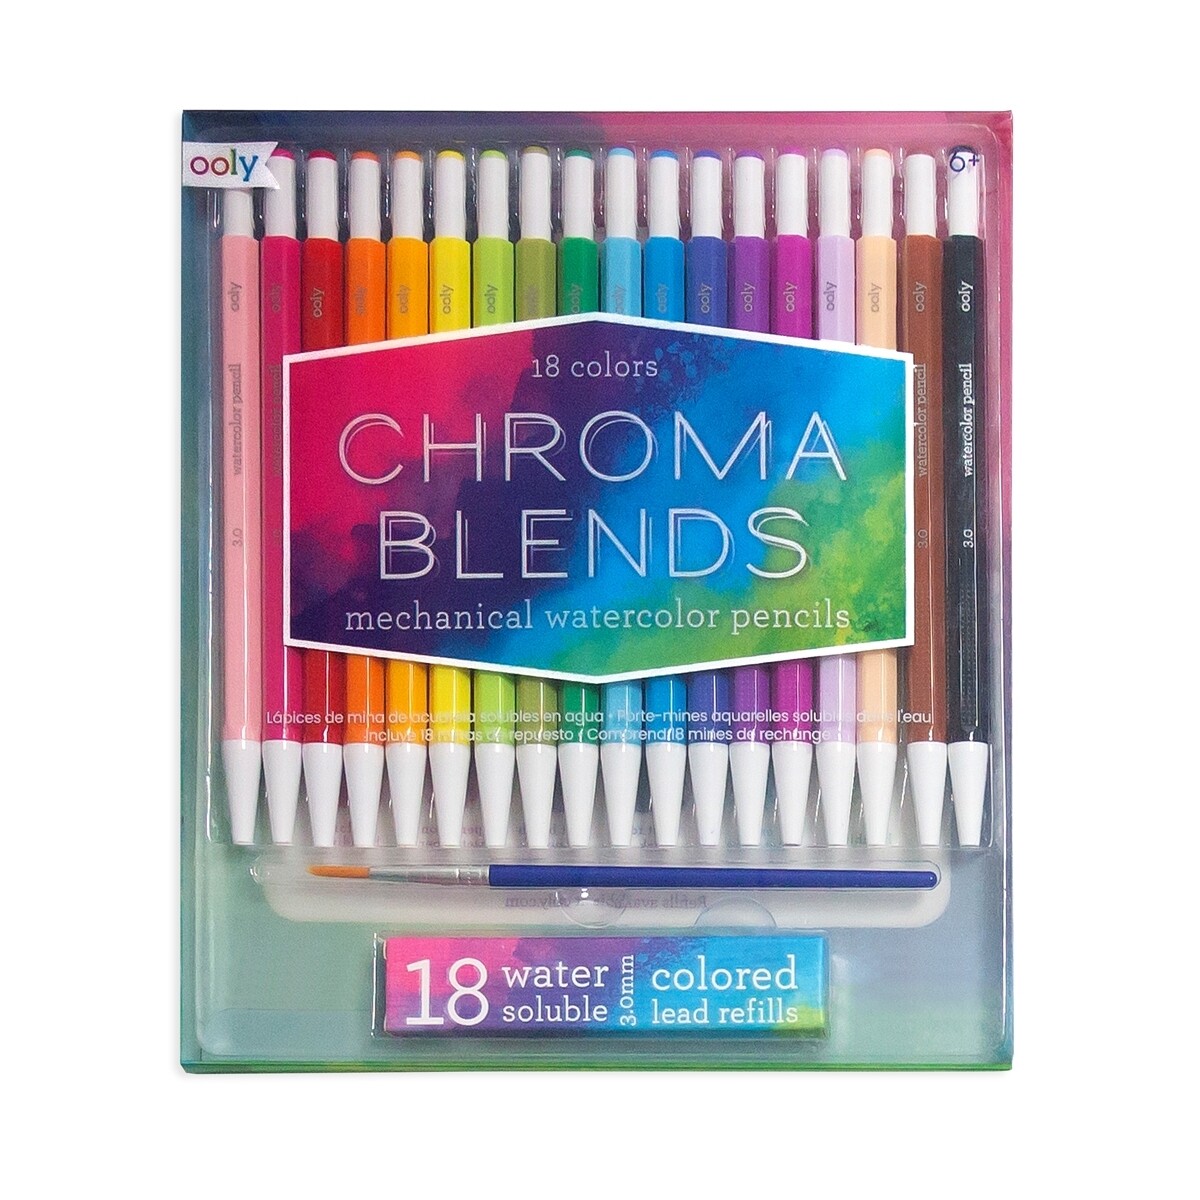 Chroma Blends Mechanical Watercolored Pencils